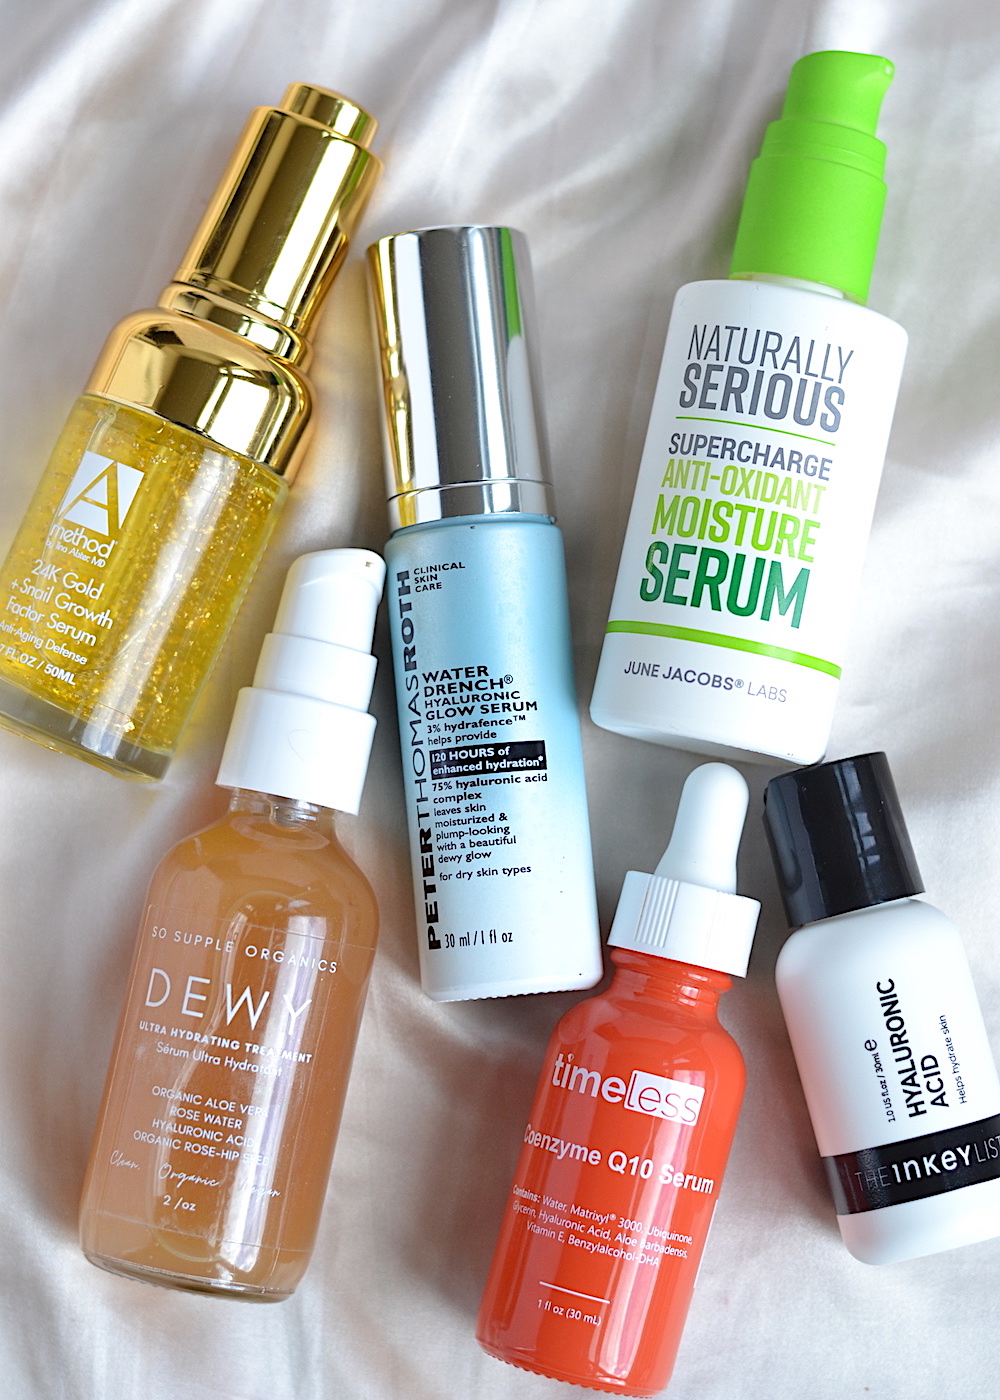 Dealing with dull, flaky skin? Here are some of the best hydrating serums for dry skin that pack a majorly moisturizing punch for a dewy, healthy complexion that glows! 